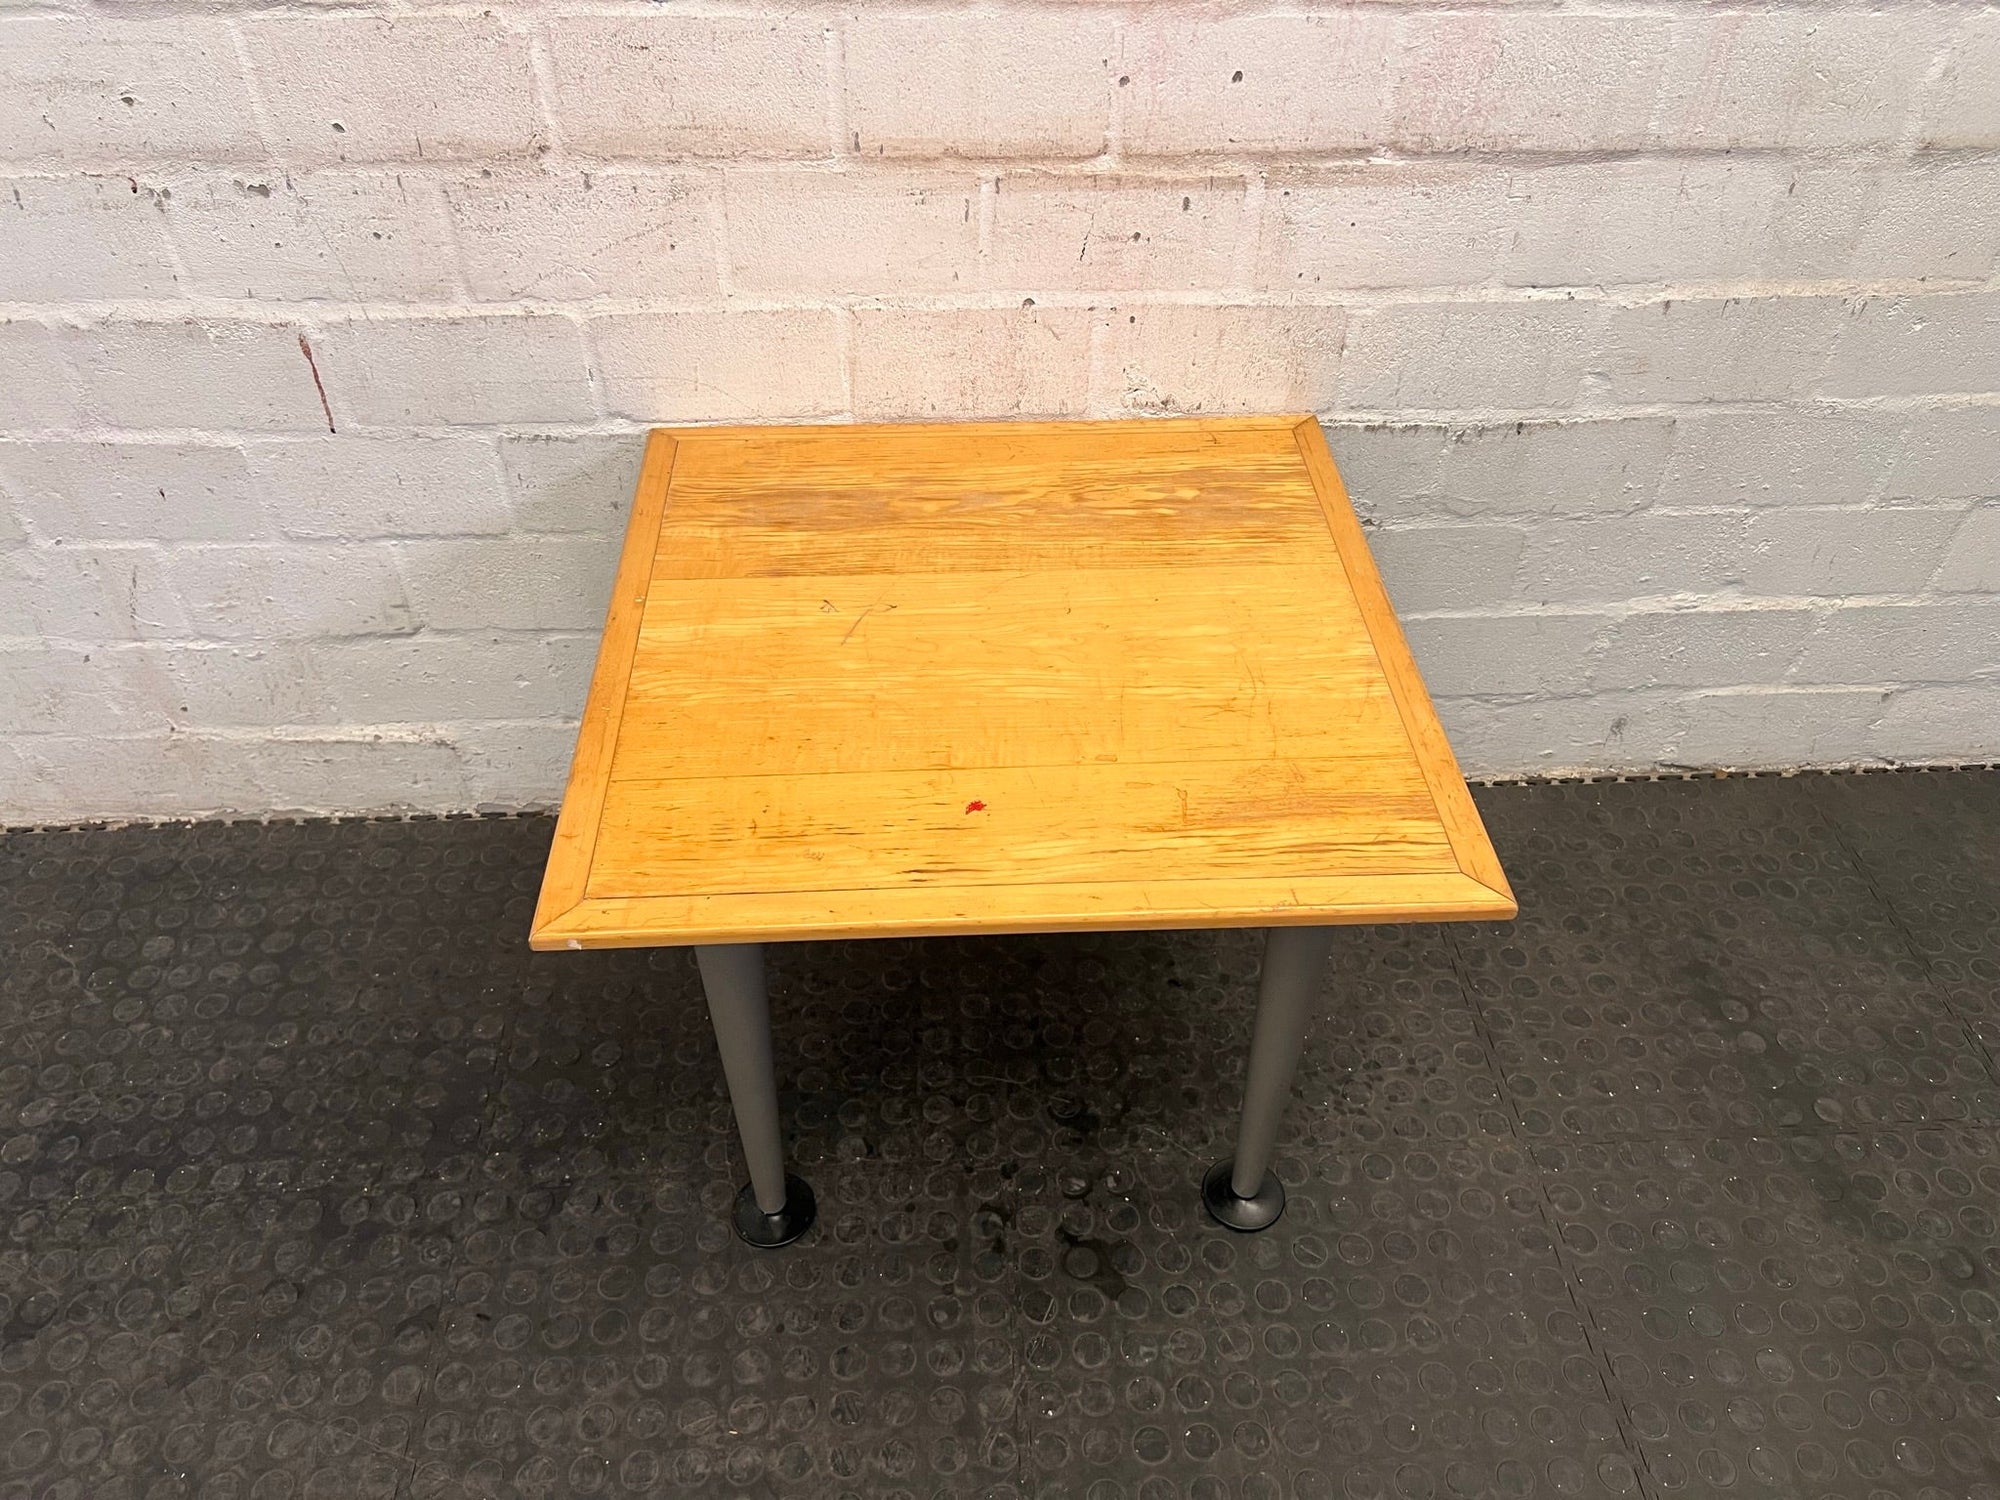 Wooden Top Table with Steel Legs